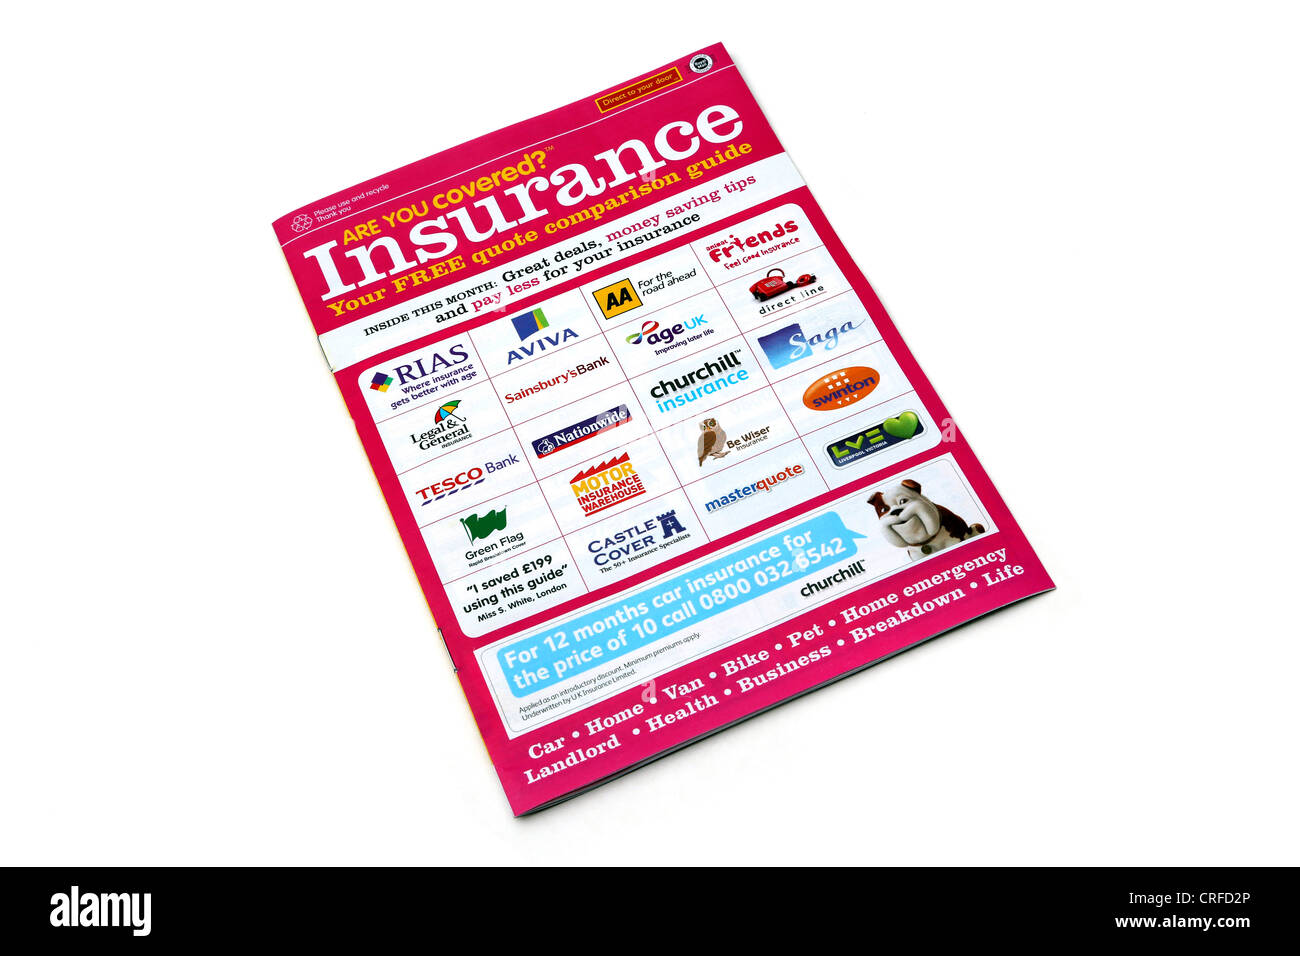 A Brochure Advertising Insurance Companies Comparison Guide Stock Photo